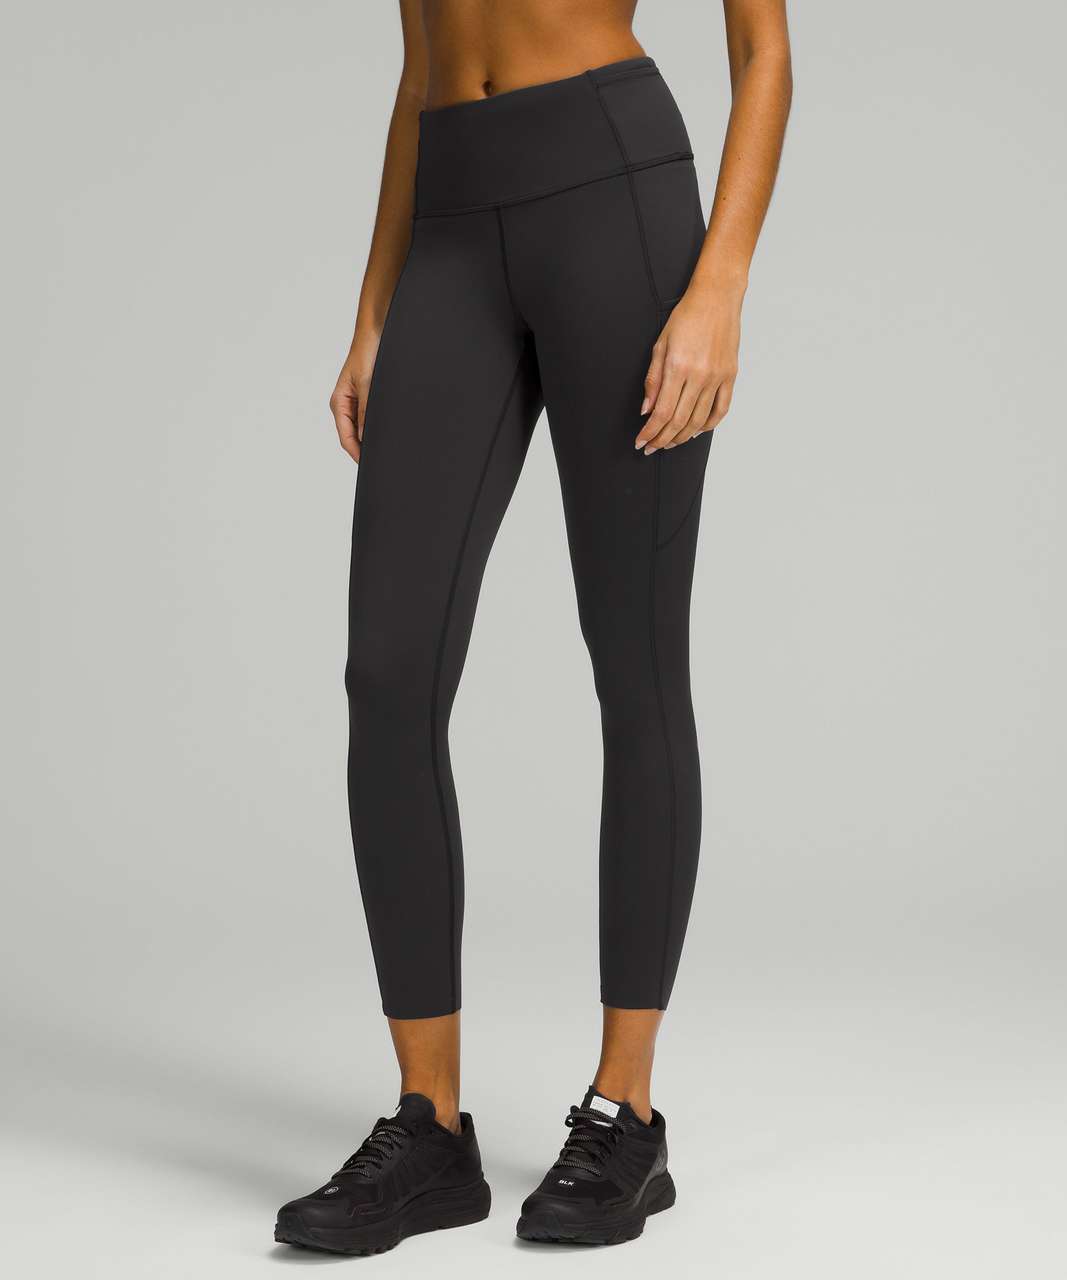 Lululemon Fast and Free High-Rise Tight 25" *Brushed Nulux - Black